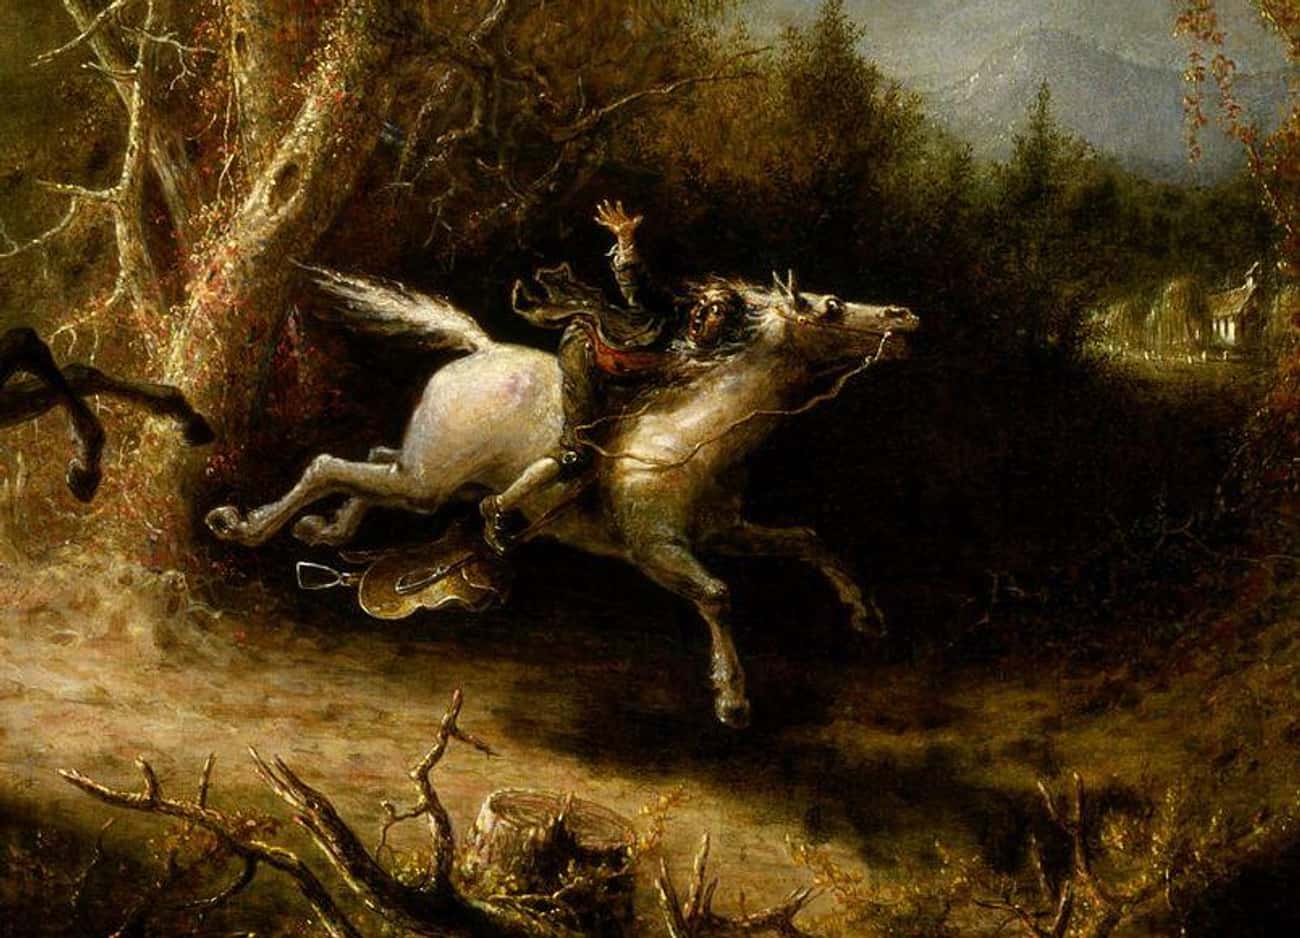 A Slain Highwayman Supposedly Reappears Each Christmas Eve